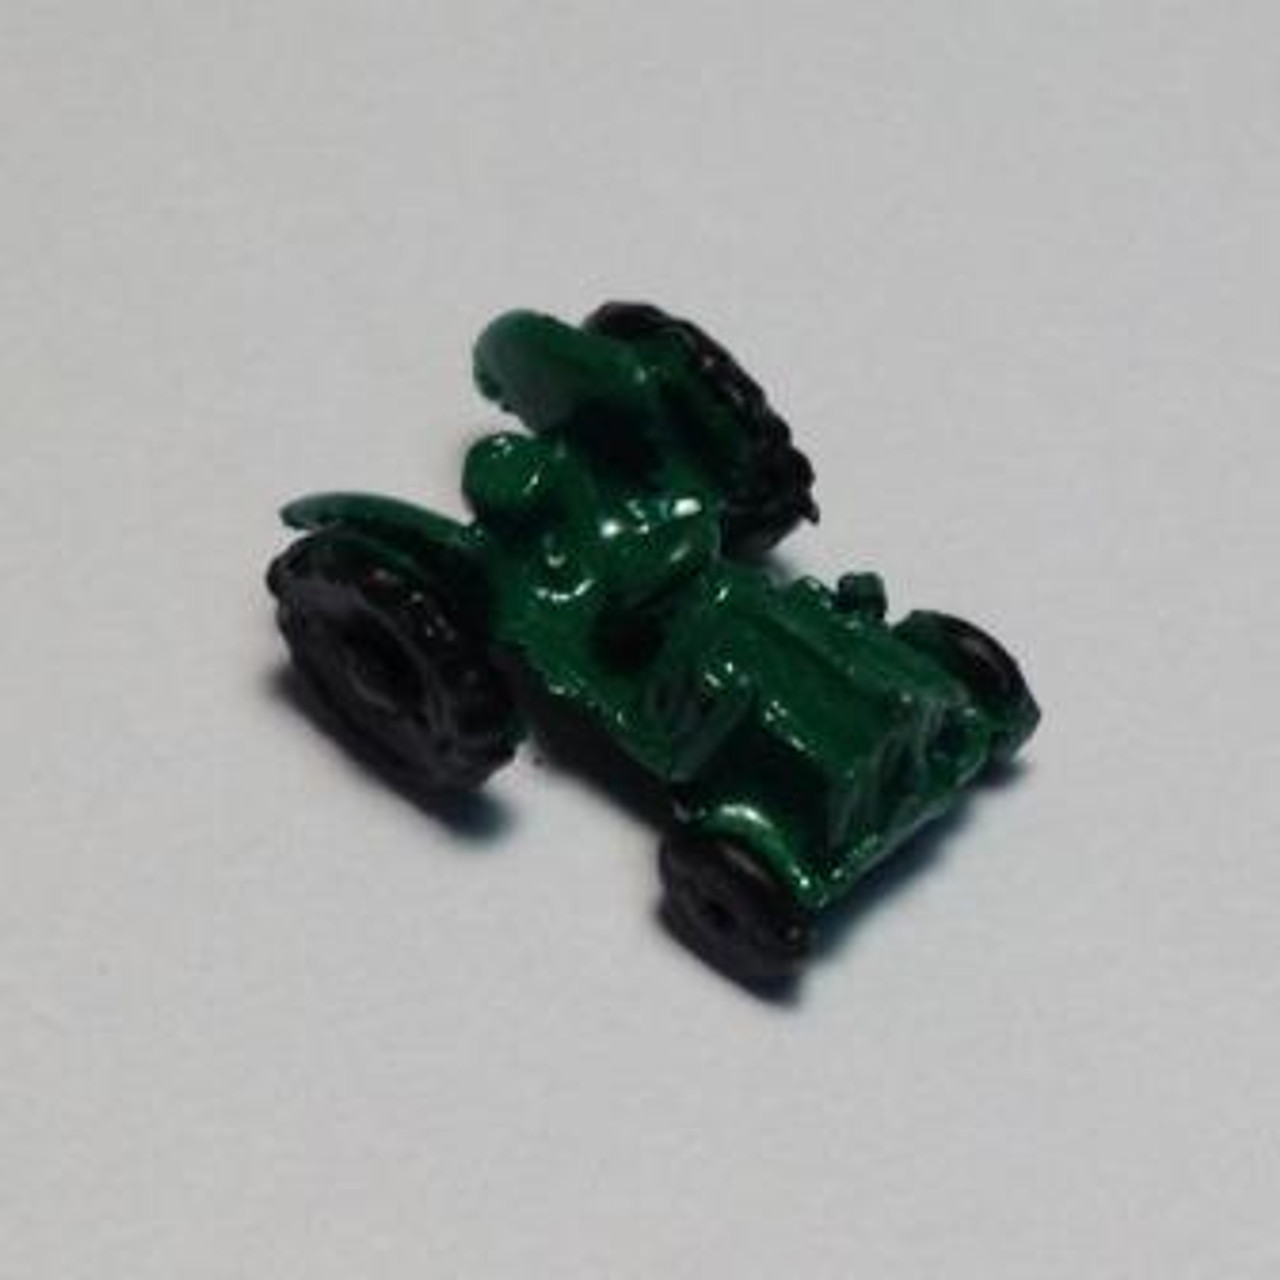 Toy Farm Tractor (IC2915)